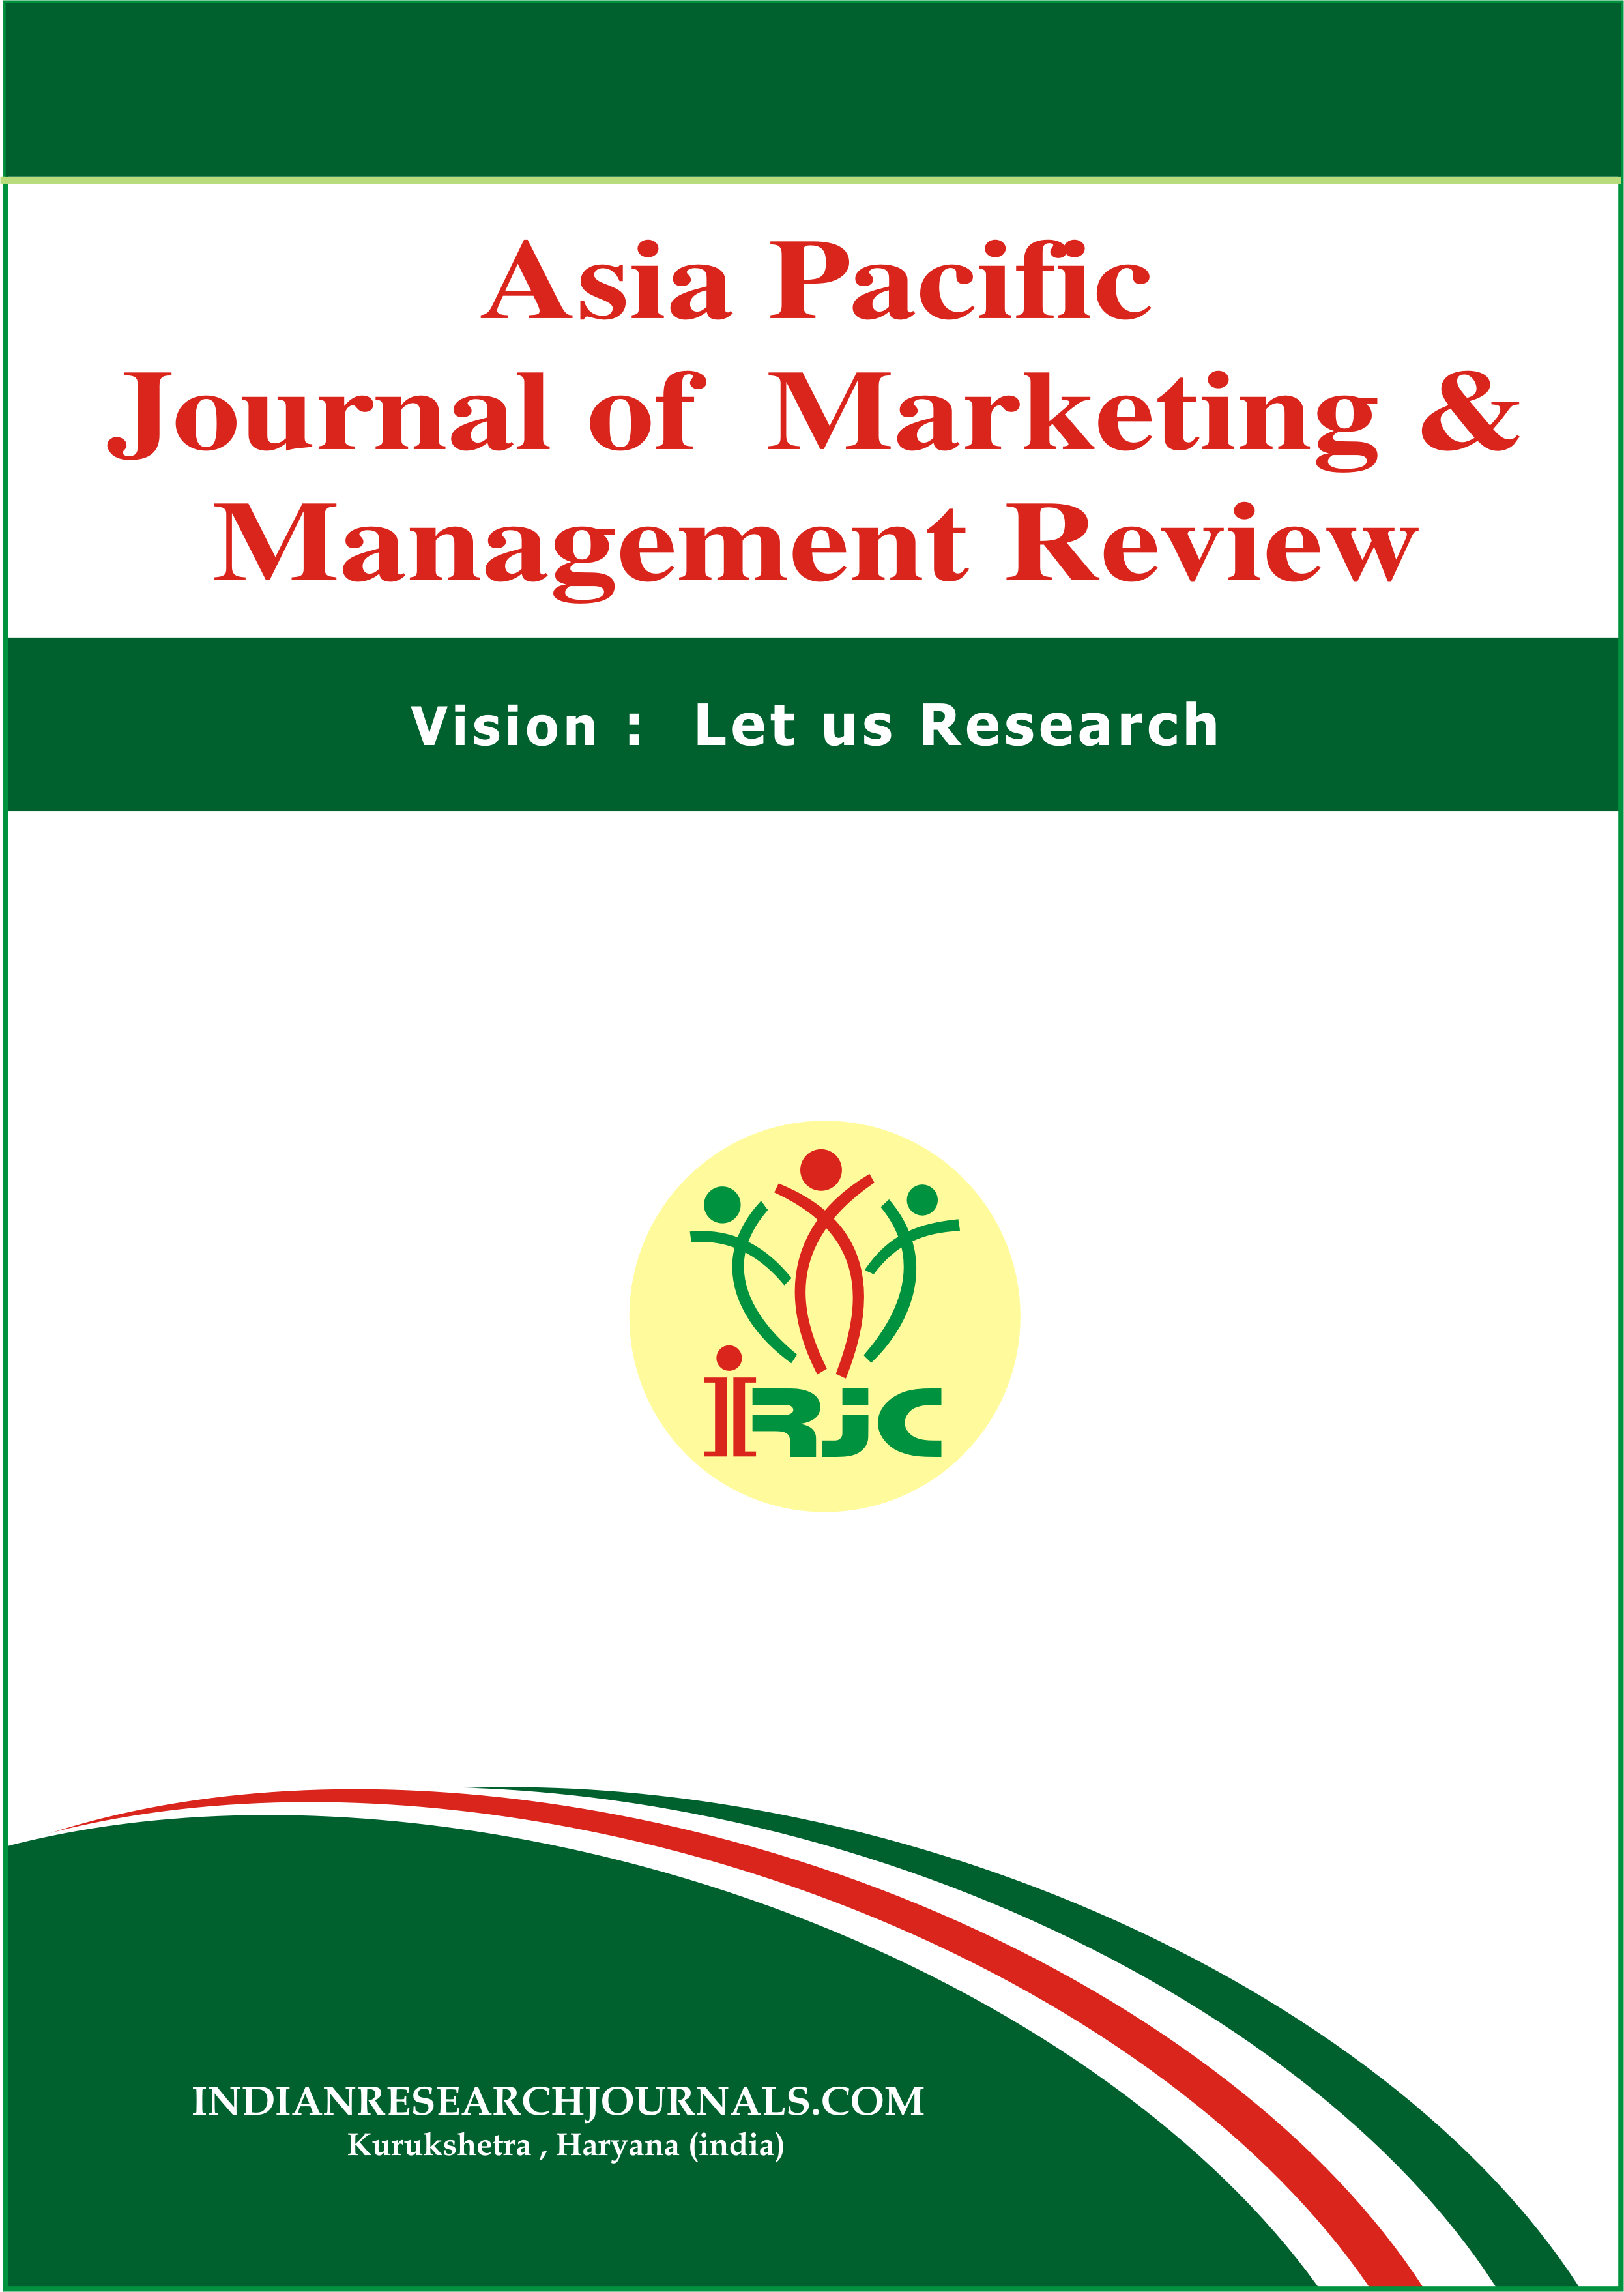 					View Vol. 11 No. 10 (2022): ASIA PACIFIC JOURNAL OF MARKETING & MANAGEMENT REVIEW
				